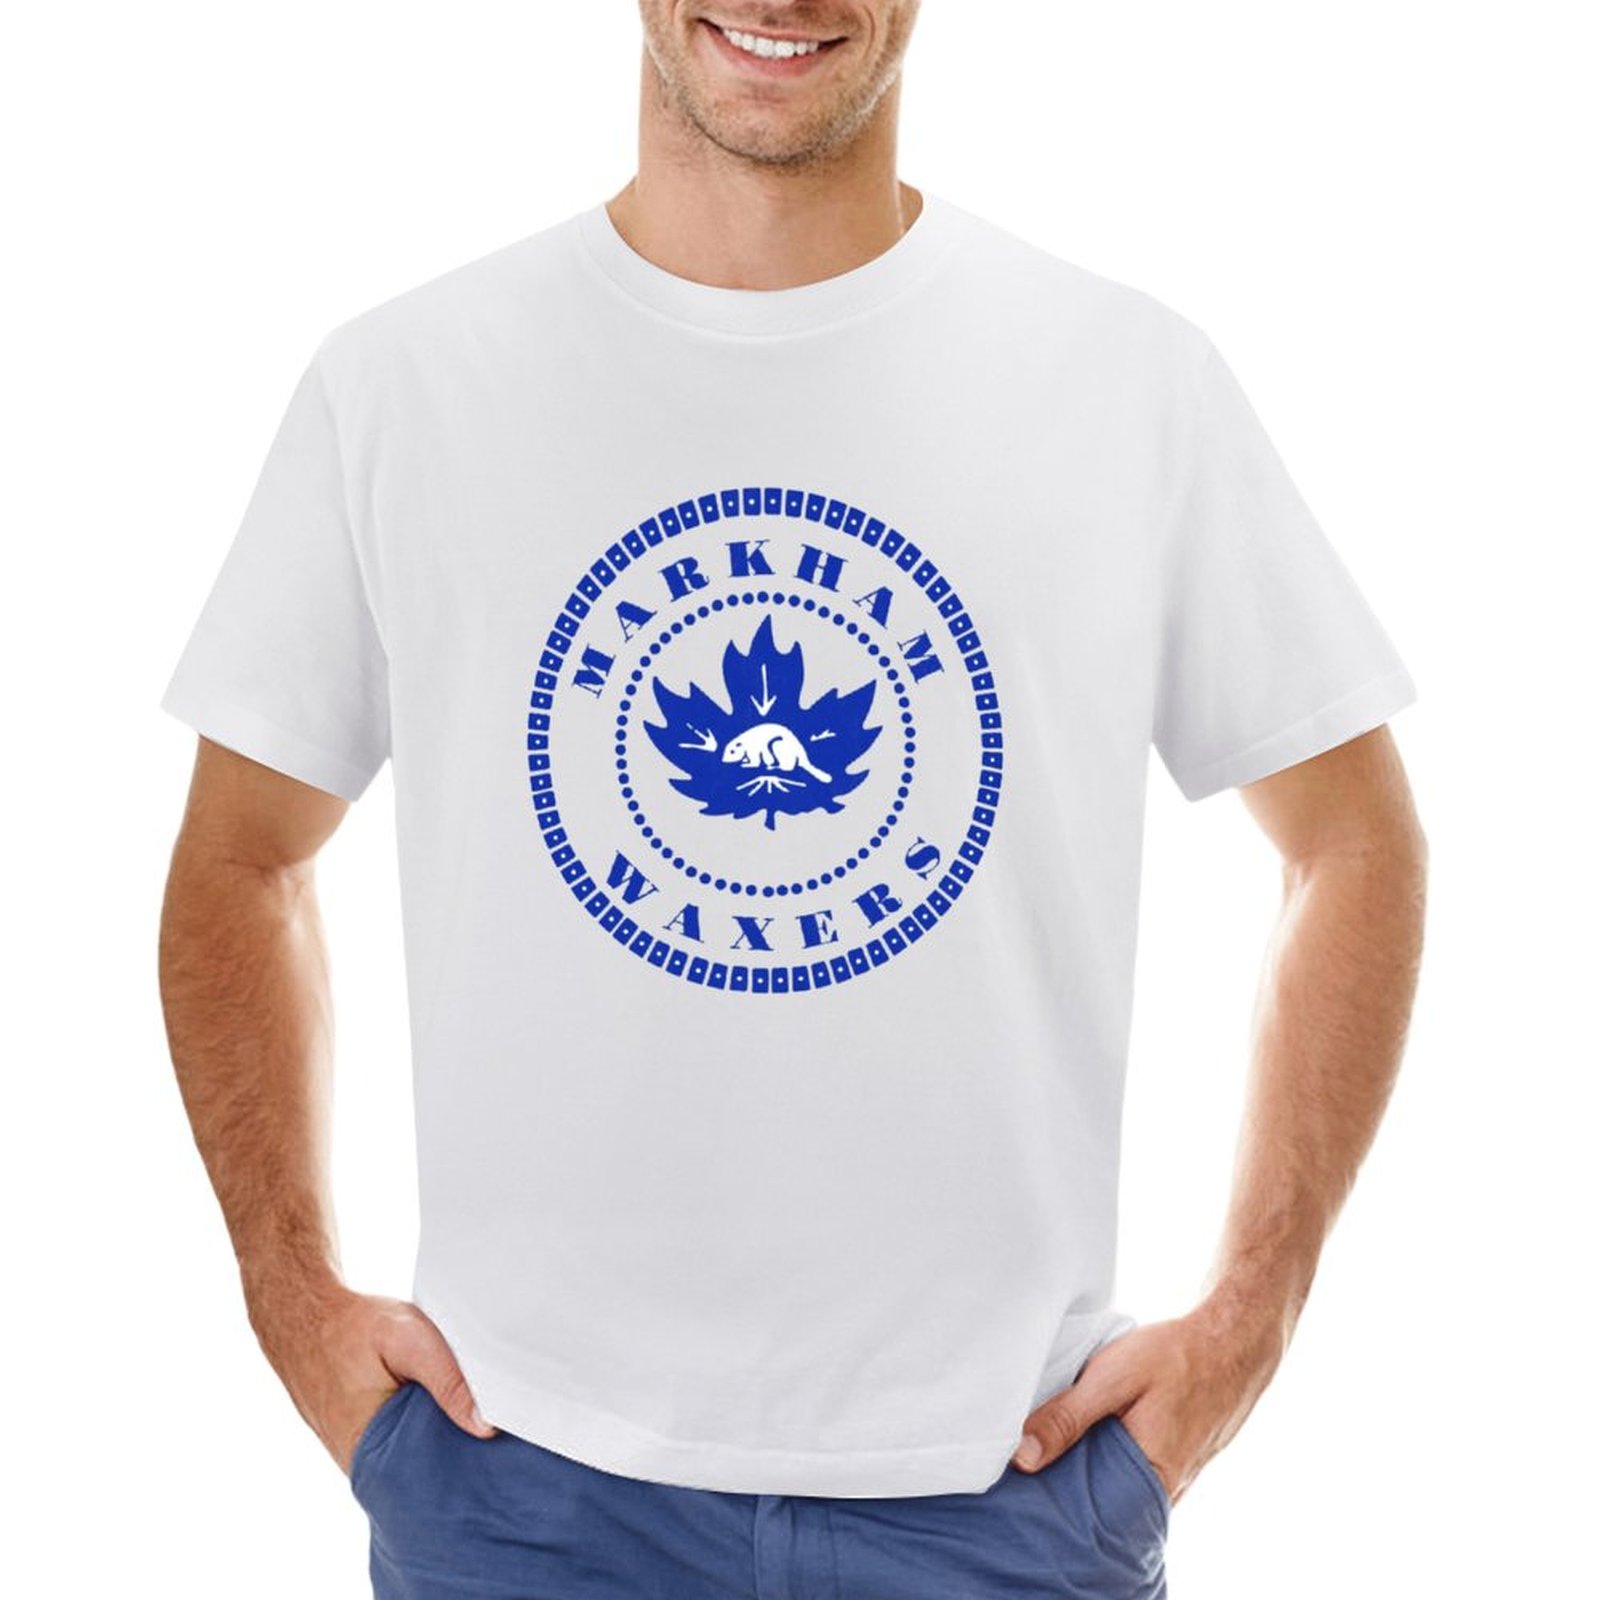 Markham Waxers Ontario Junior Hockey League Vintage For-Funct Fans Vintage Aesthetic Clothing Мужские